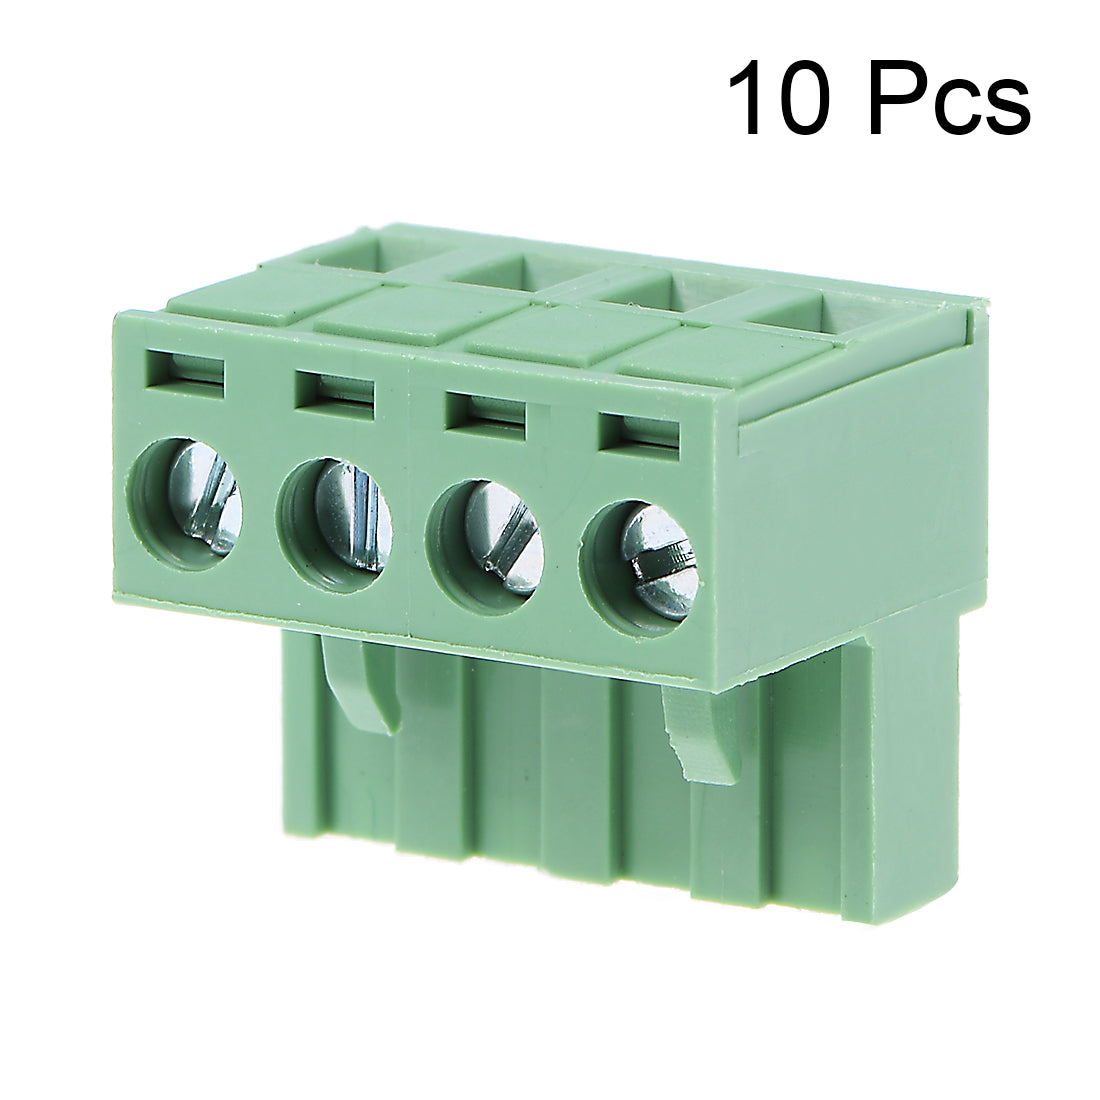 uxcell Uxcell 10Pcs AC300V 15A 5.08mm Pitch 4 Pin Flat Angle Needle Seat Plug-In PCB Terminal Block Connector Green Color